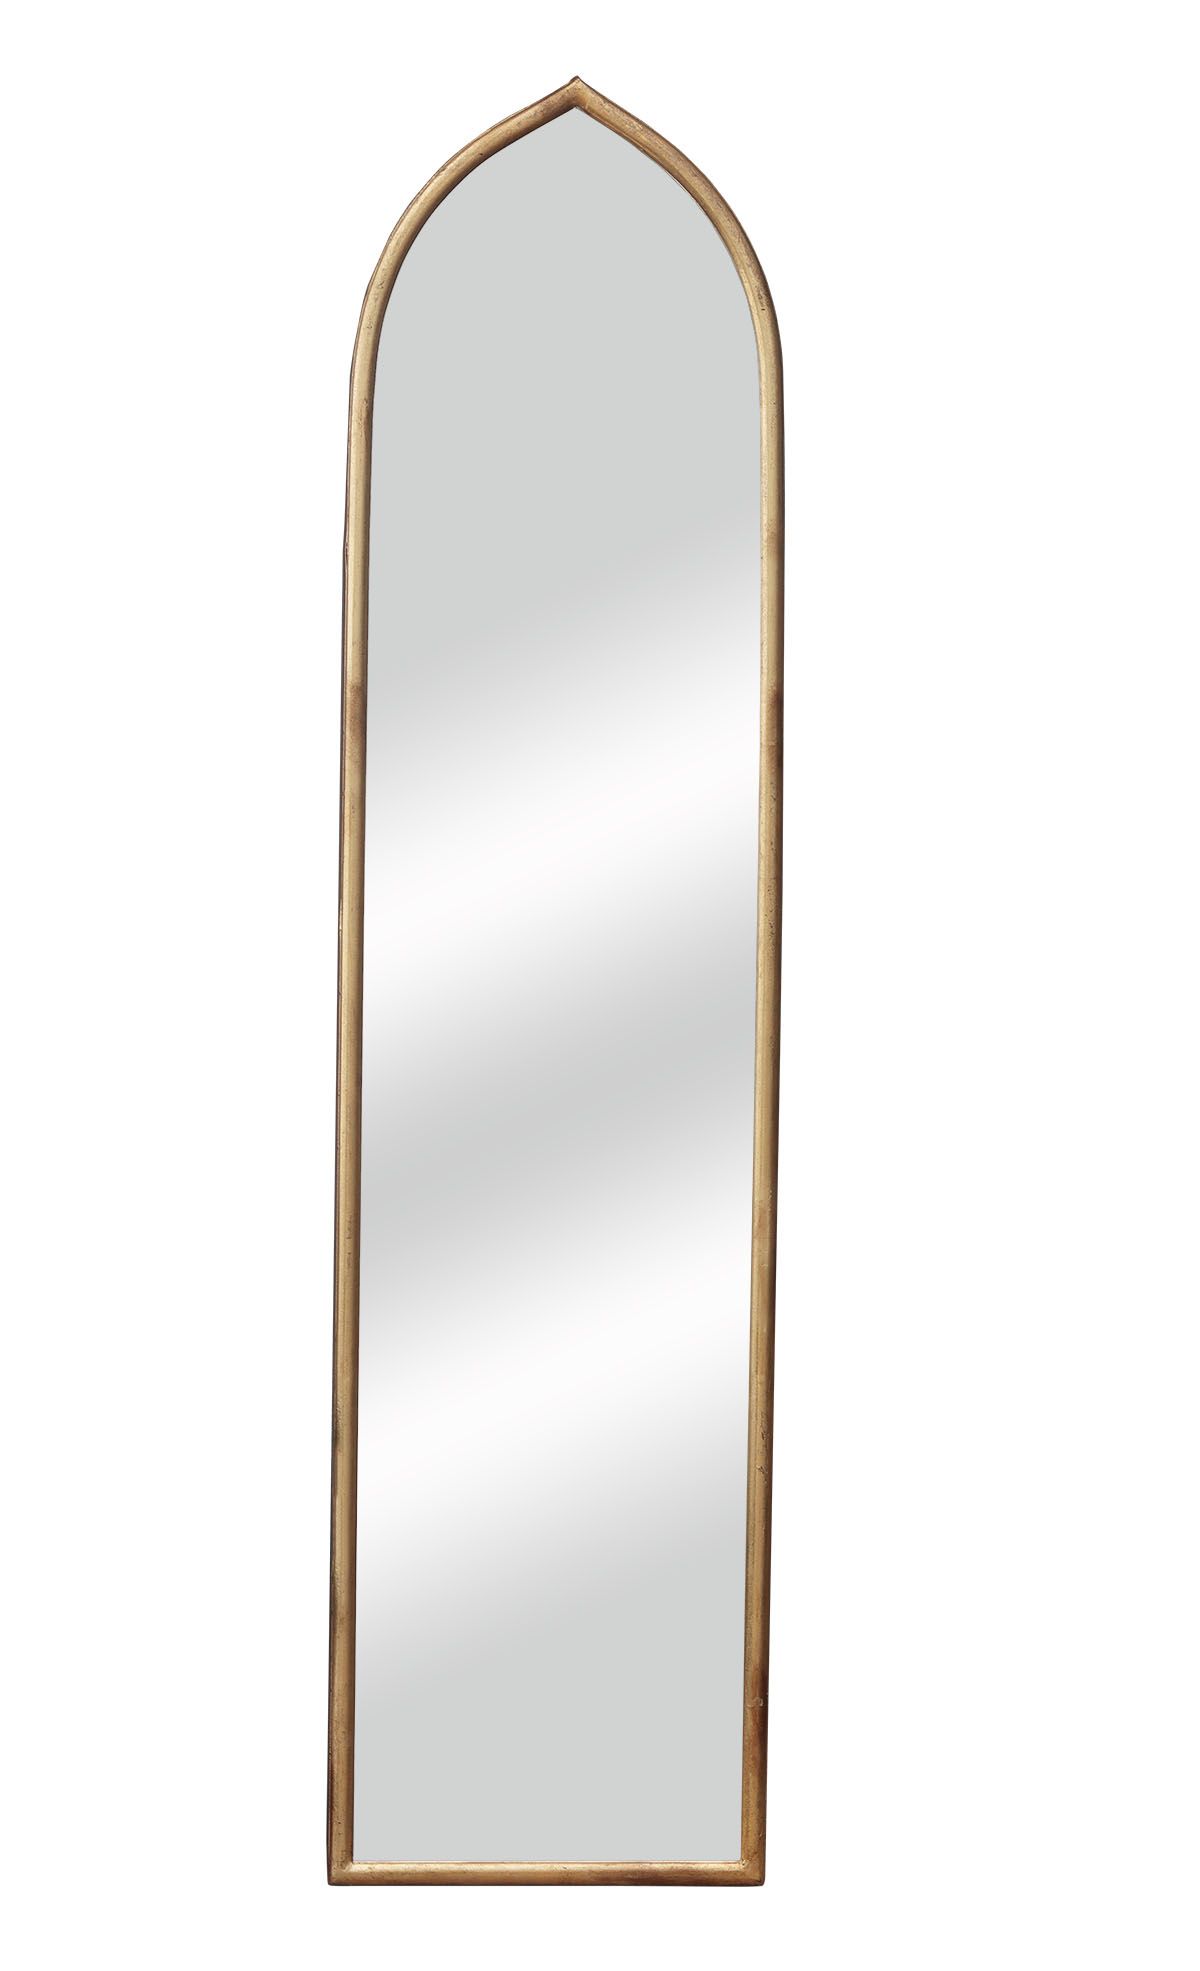 Vintage Full Length Wall Mirror With Arched Metal Frame, Simple Full In Antique Aluminum Wall Mirrors (View 15 of 15)